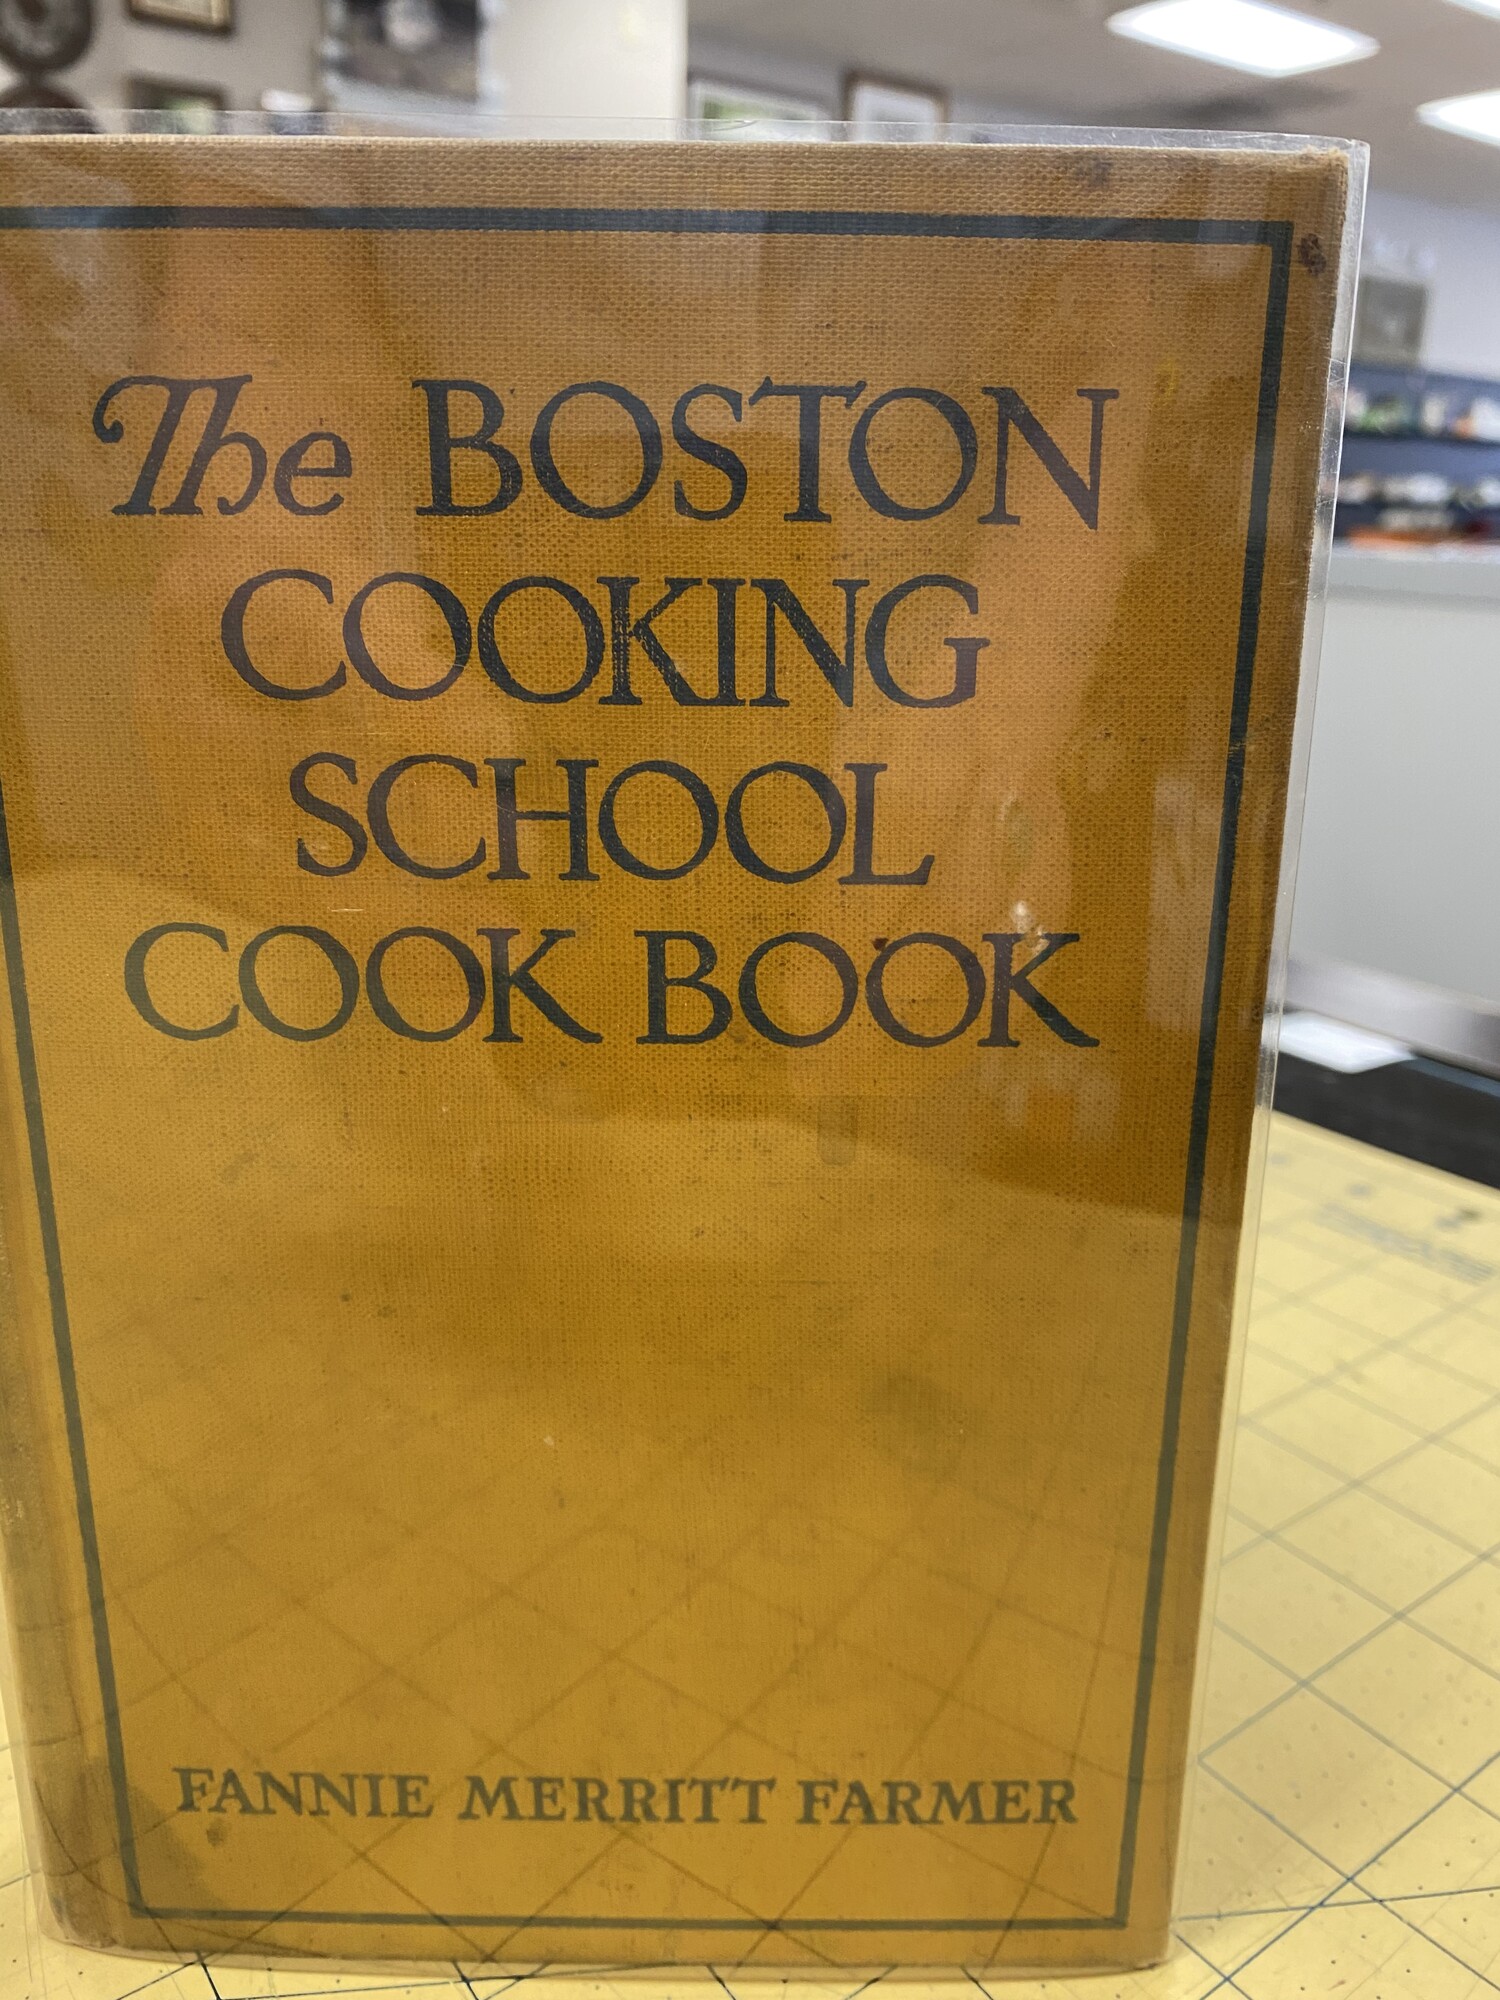 The Boston Cooking School Cook Book, Gold, Size: 6x8 Inch
By Fannie Farmer